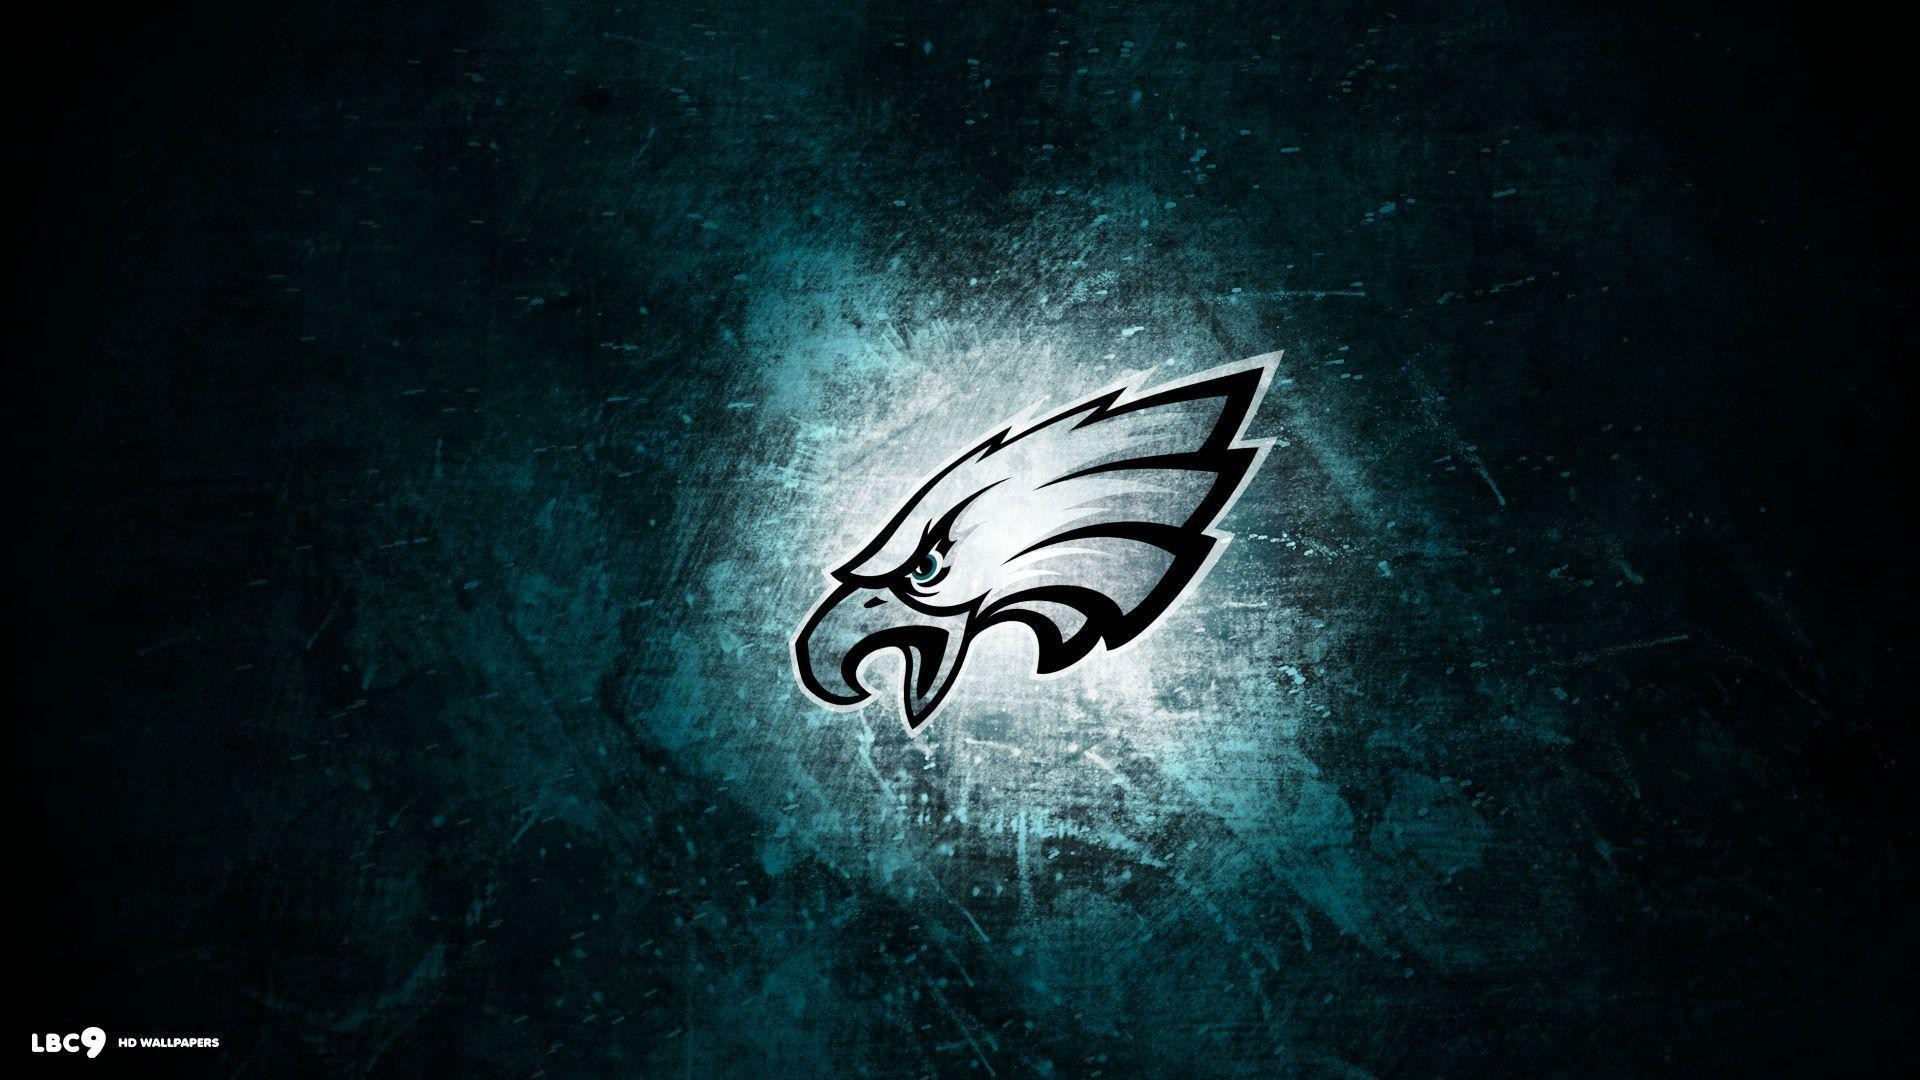 HD Eagles Backgrounds With Resolution 1920X1080 pixel. You can make this wallpaper for your Mac or Windows Desktop Background, iPhone, Android or Tablet and another Smartphone device for free